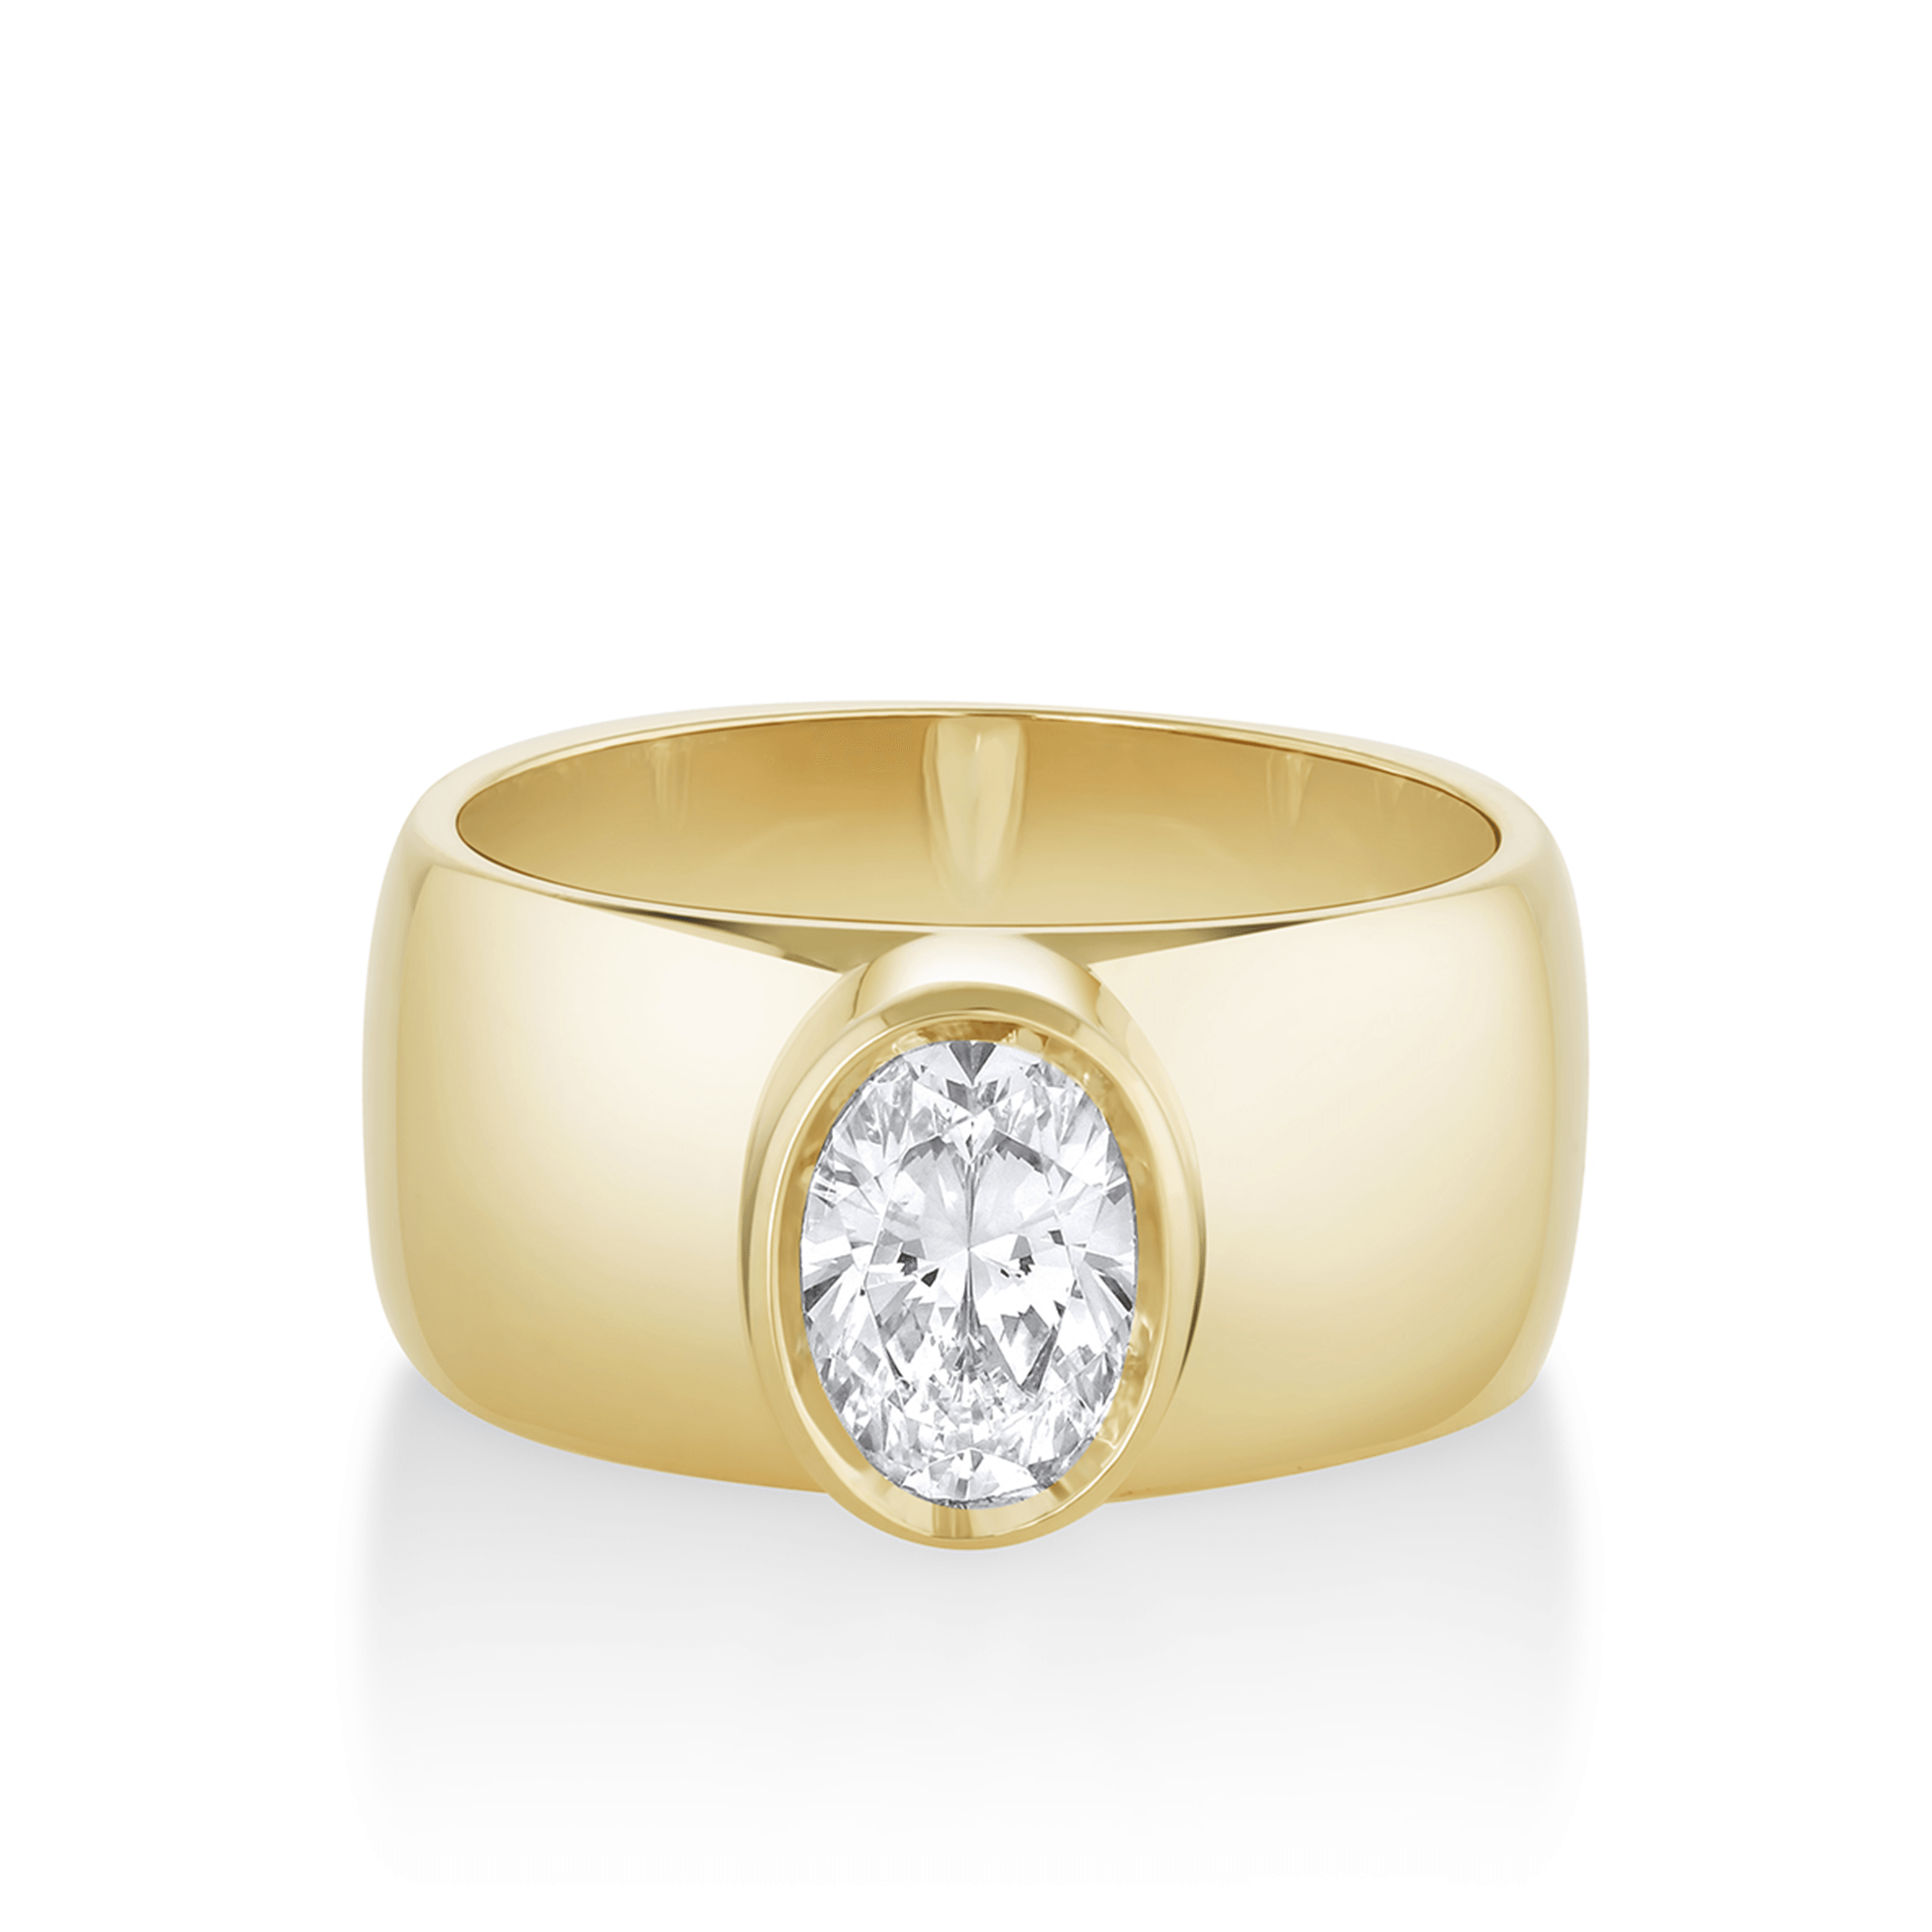 The Harlow Cigar Band Engagement Ring 1.5ct / 18K Yellow Gold by Marrow Fine